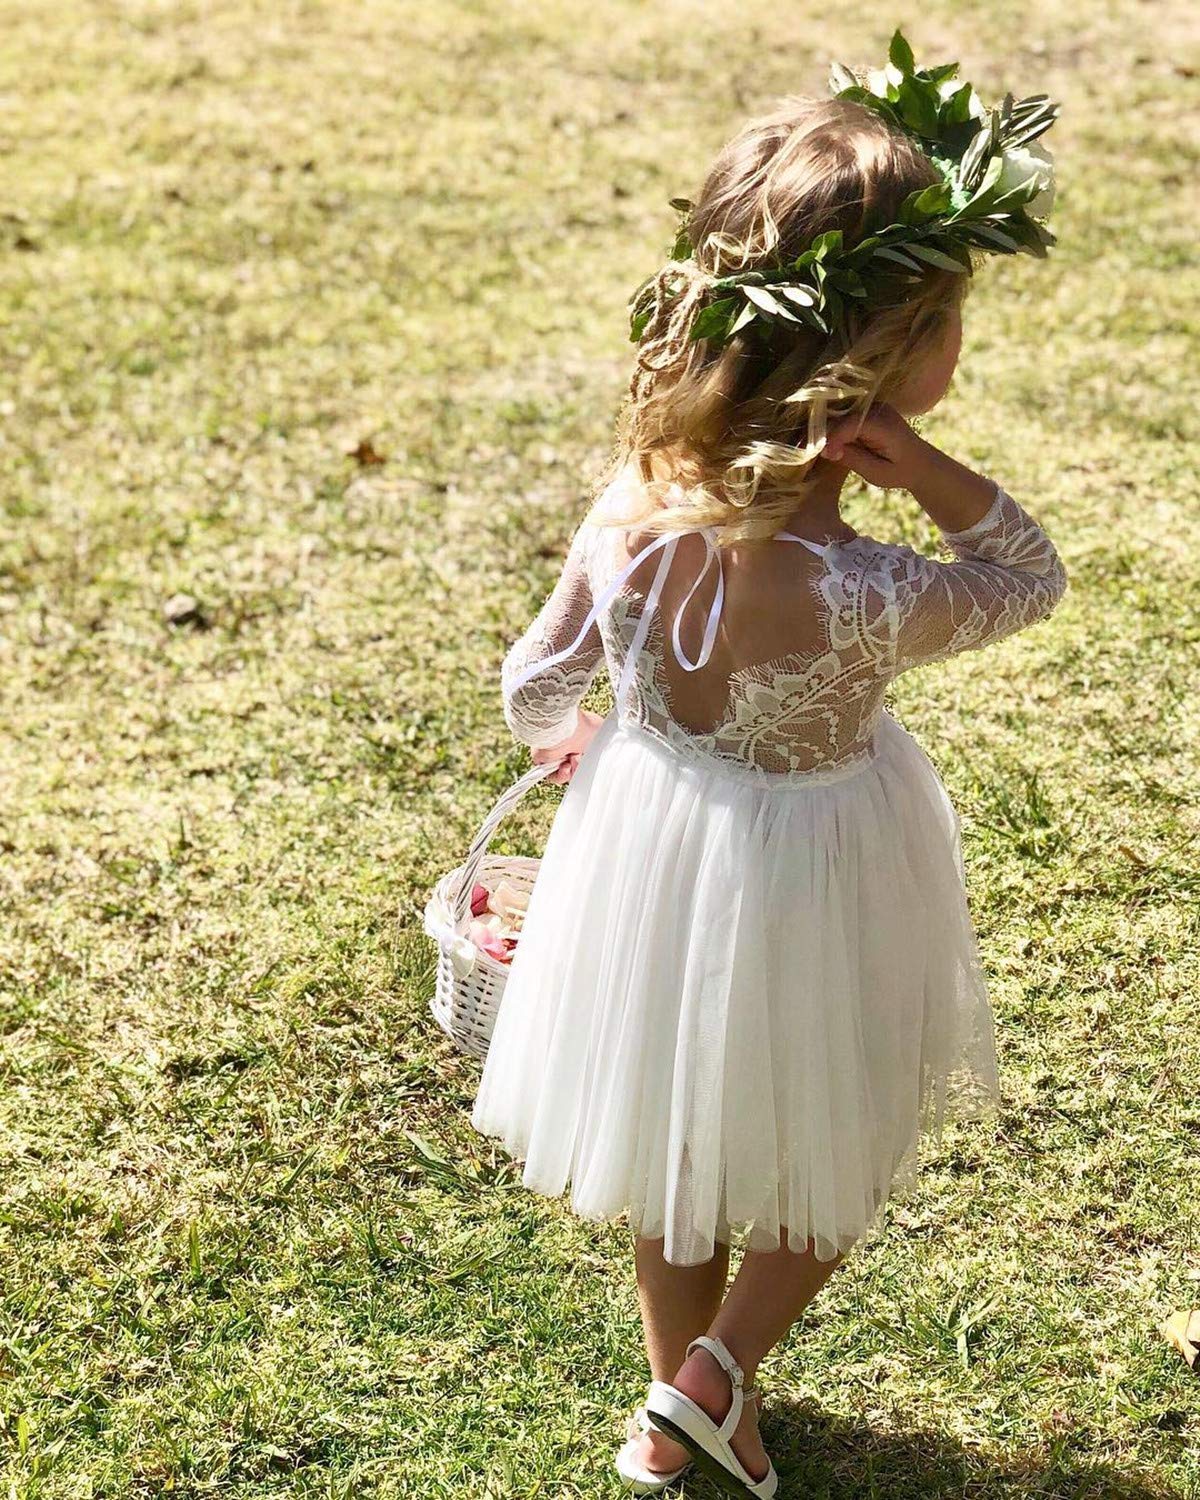 2Bunnies Flower Girl Dress Rose Lace Back A-Line Long Sleeve Straight Tulle Knee (White) - 2BUNNIES